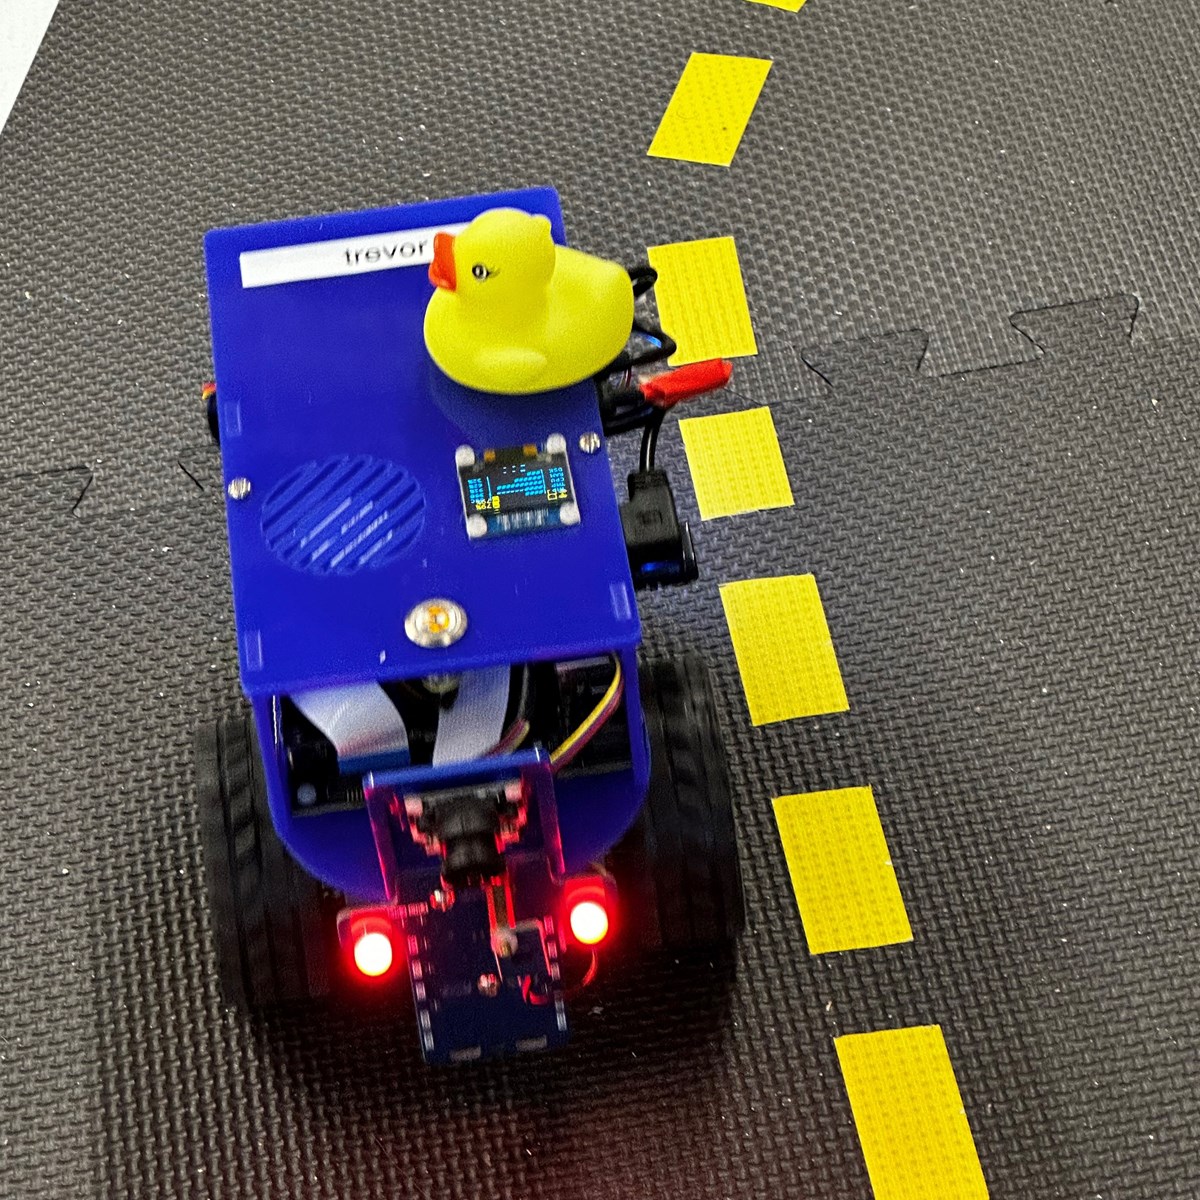 An electric robotic toy car with a rubber duck sitting on top.